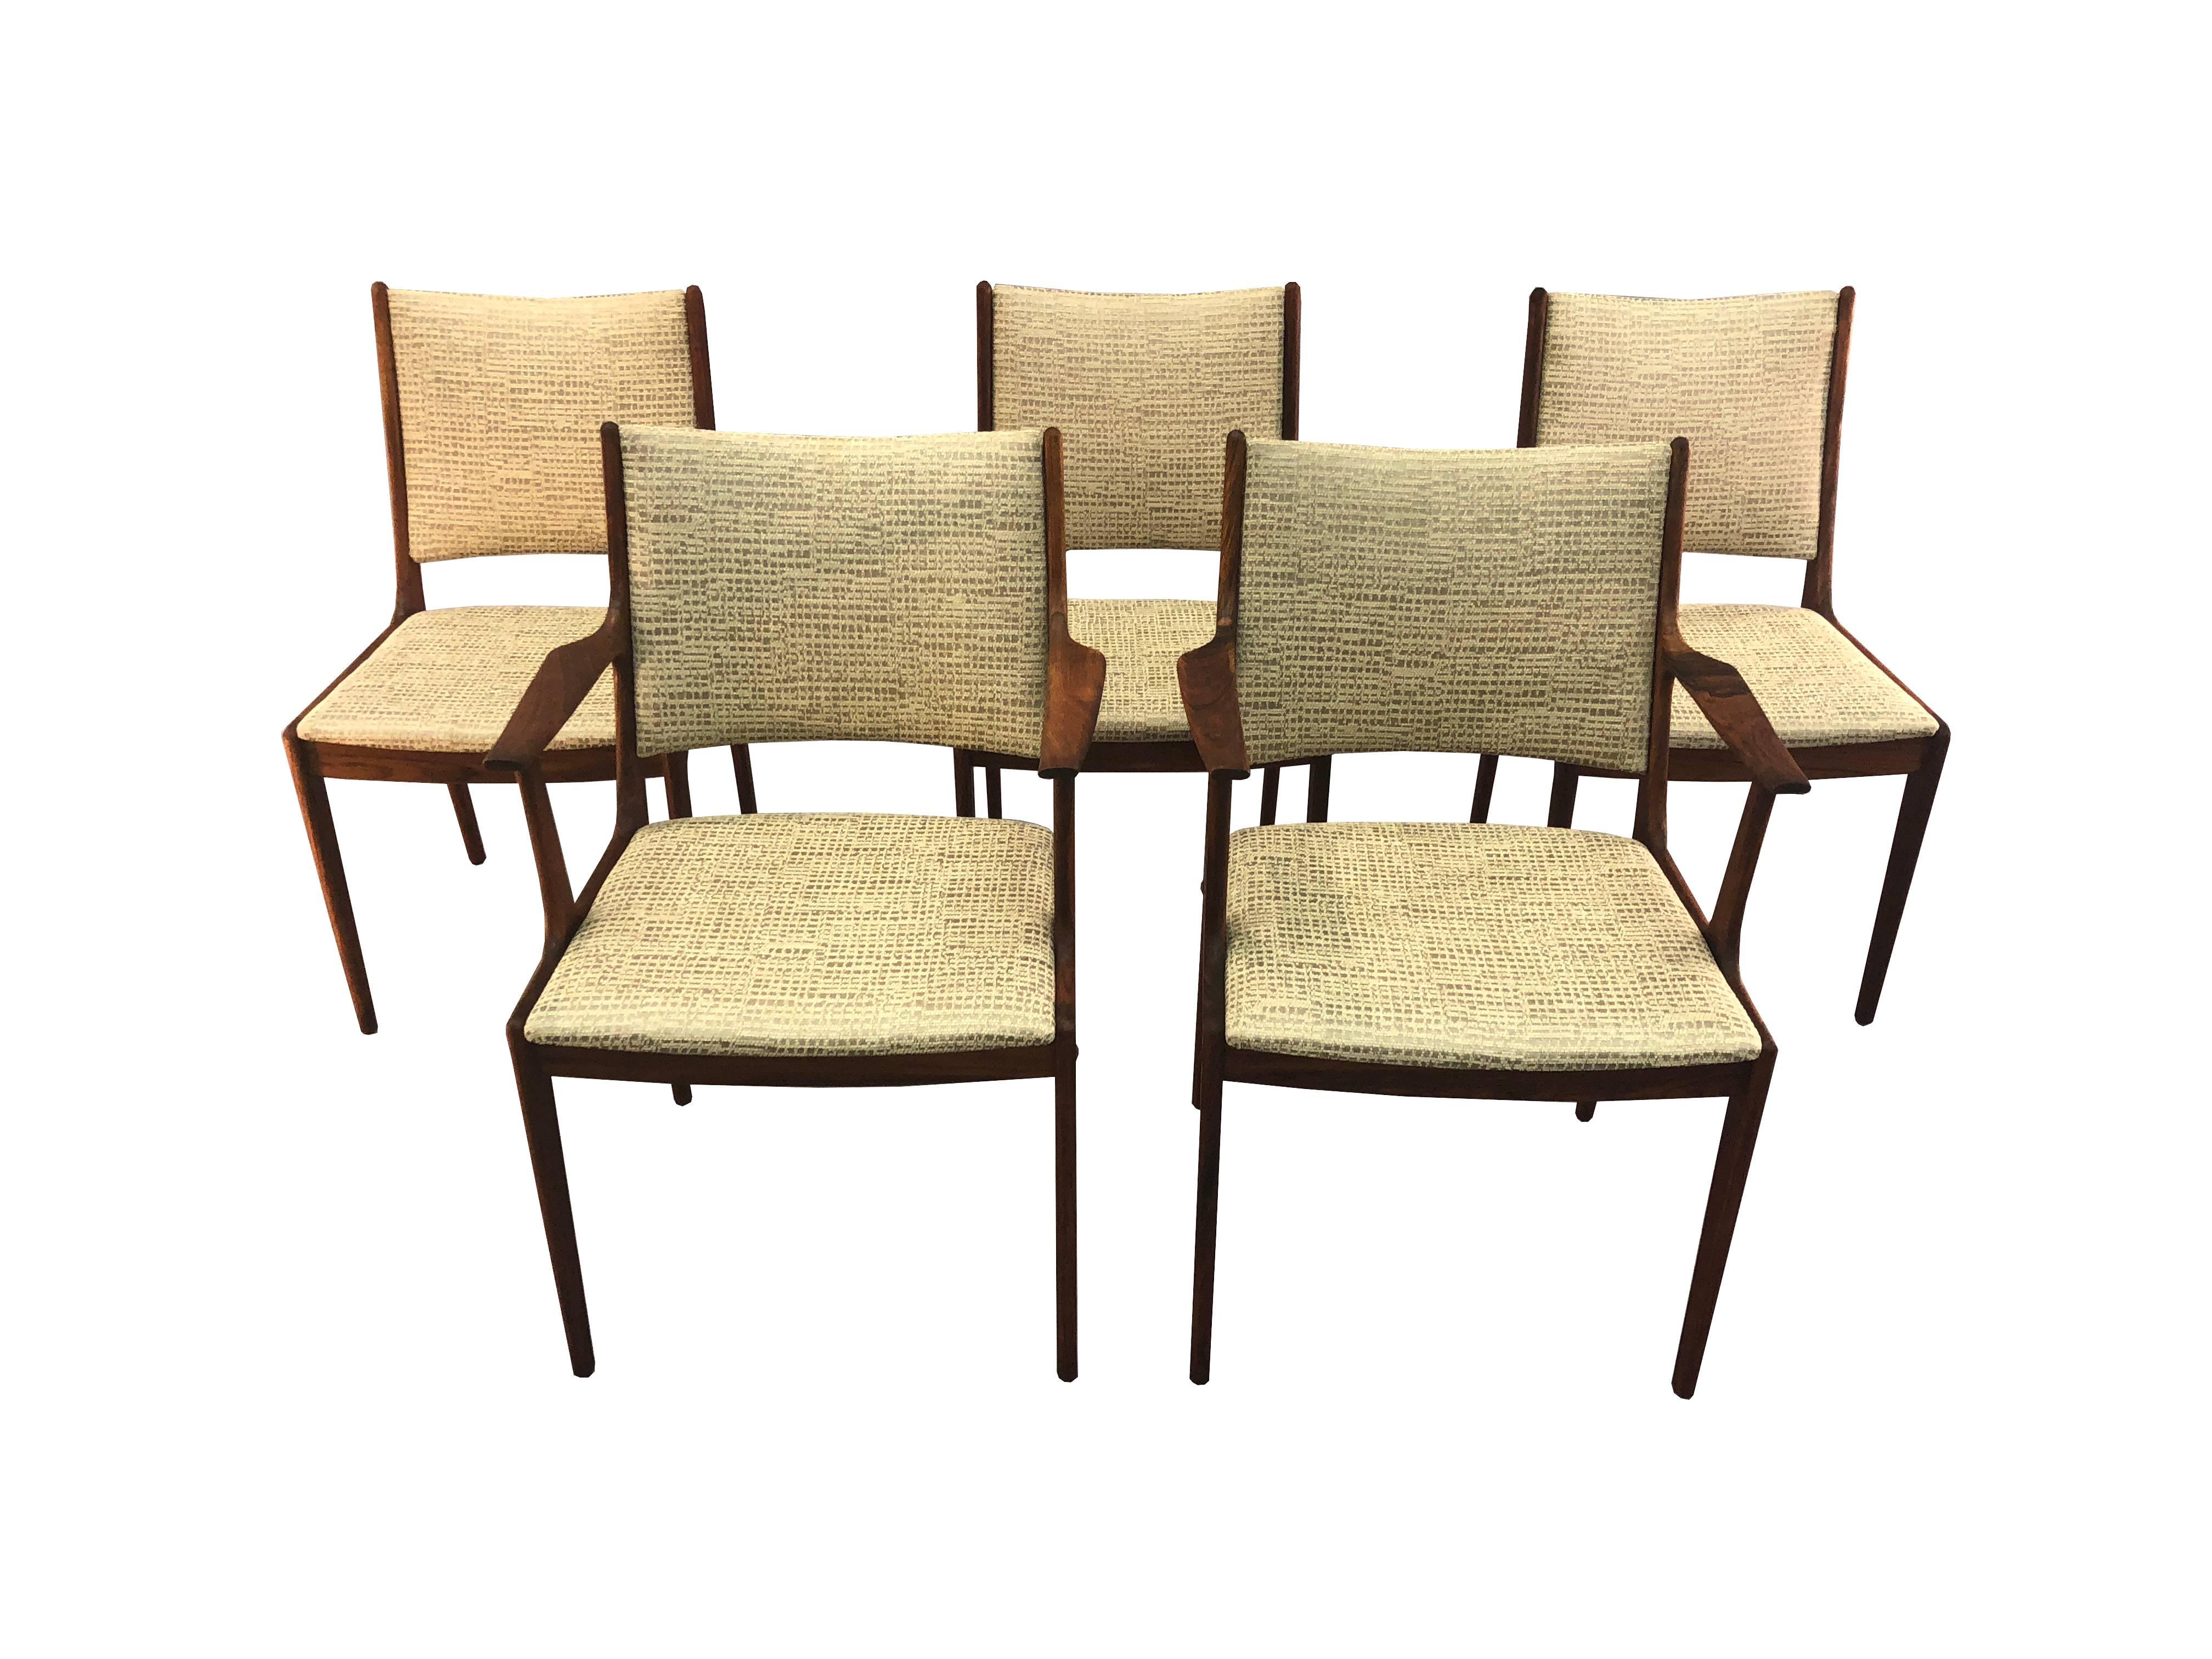 Scandinavian modern 1960s Danish set of five rosewood dining room chairs with new chenille fabric. Two chairs are armchairs. The chenille fabric is a sand and grey design. Attributed to Johannes Anderson design. Newly refinished. Arm (2): 20in L x